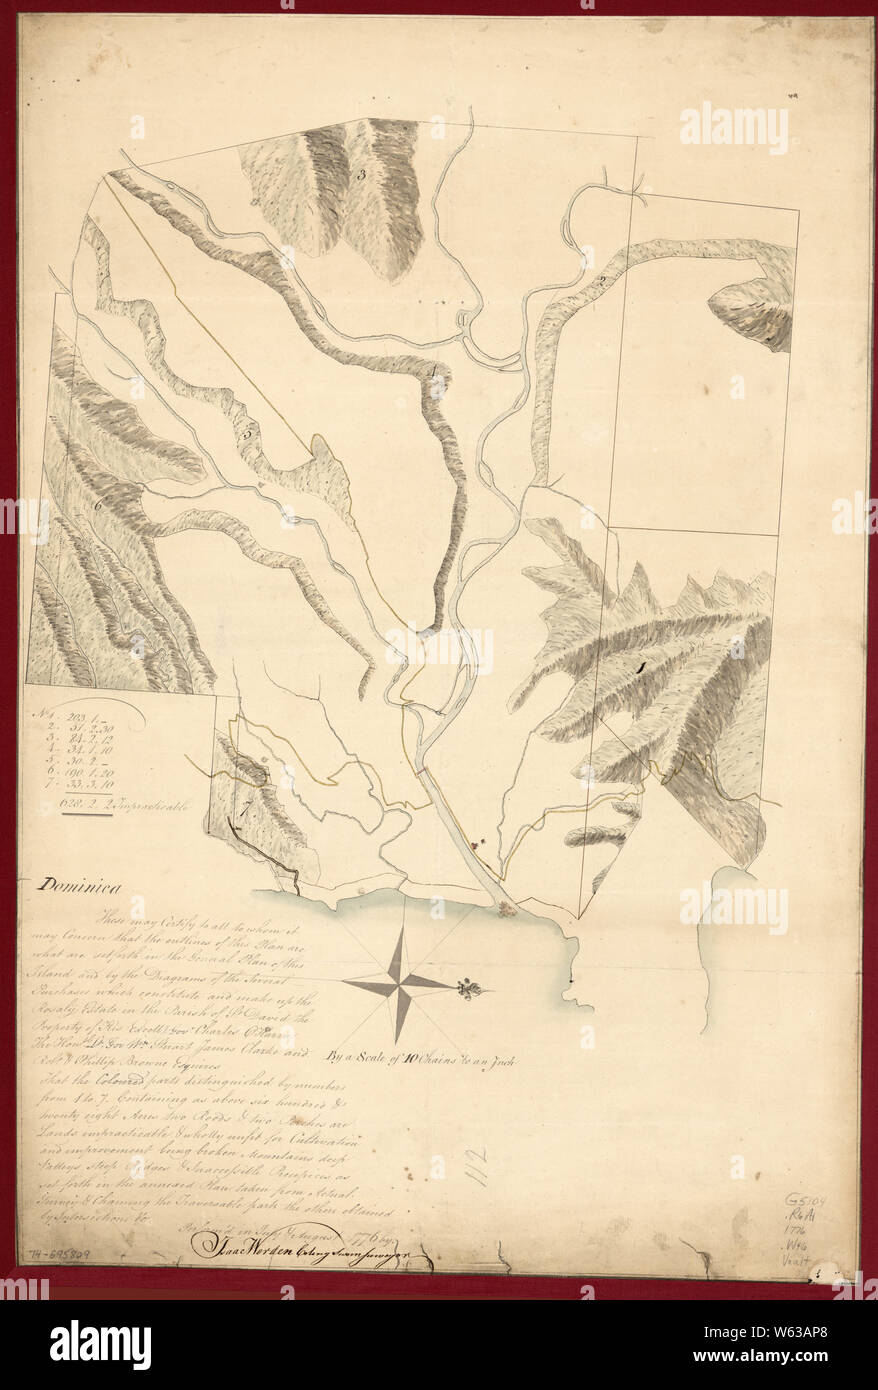 American Revolutionary War Era Maps 1750-1786 242 A plan of the Rosalij Compy Estates showing the impracticable lands Rebuild and Repair Stock Photo